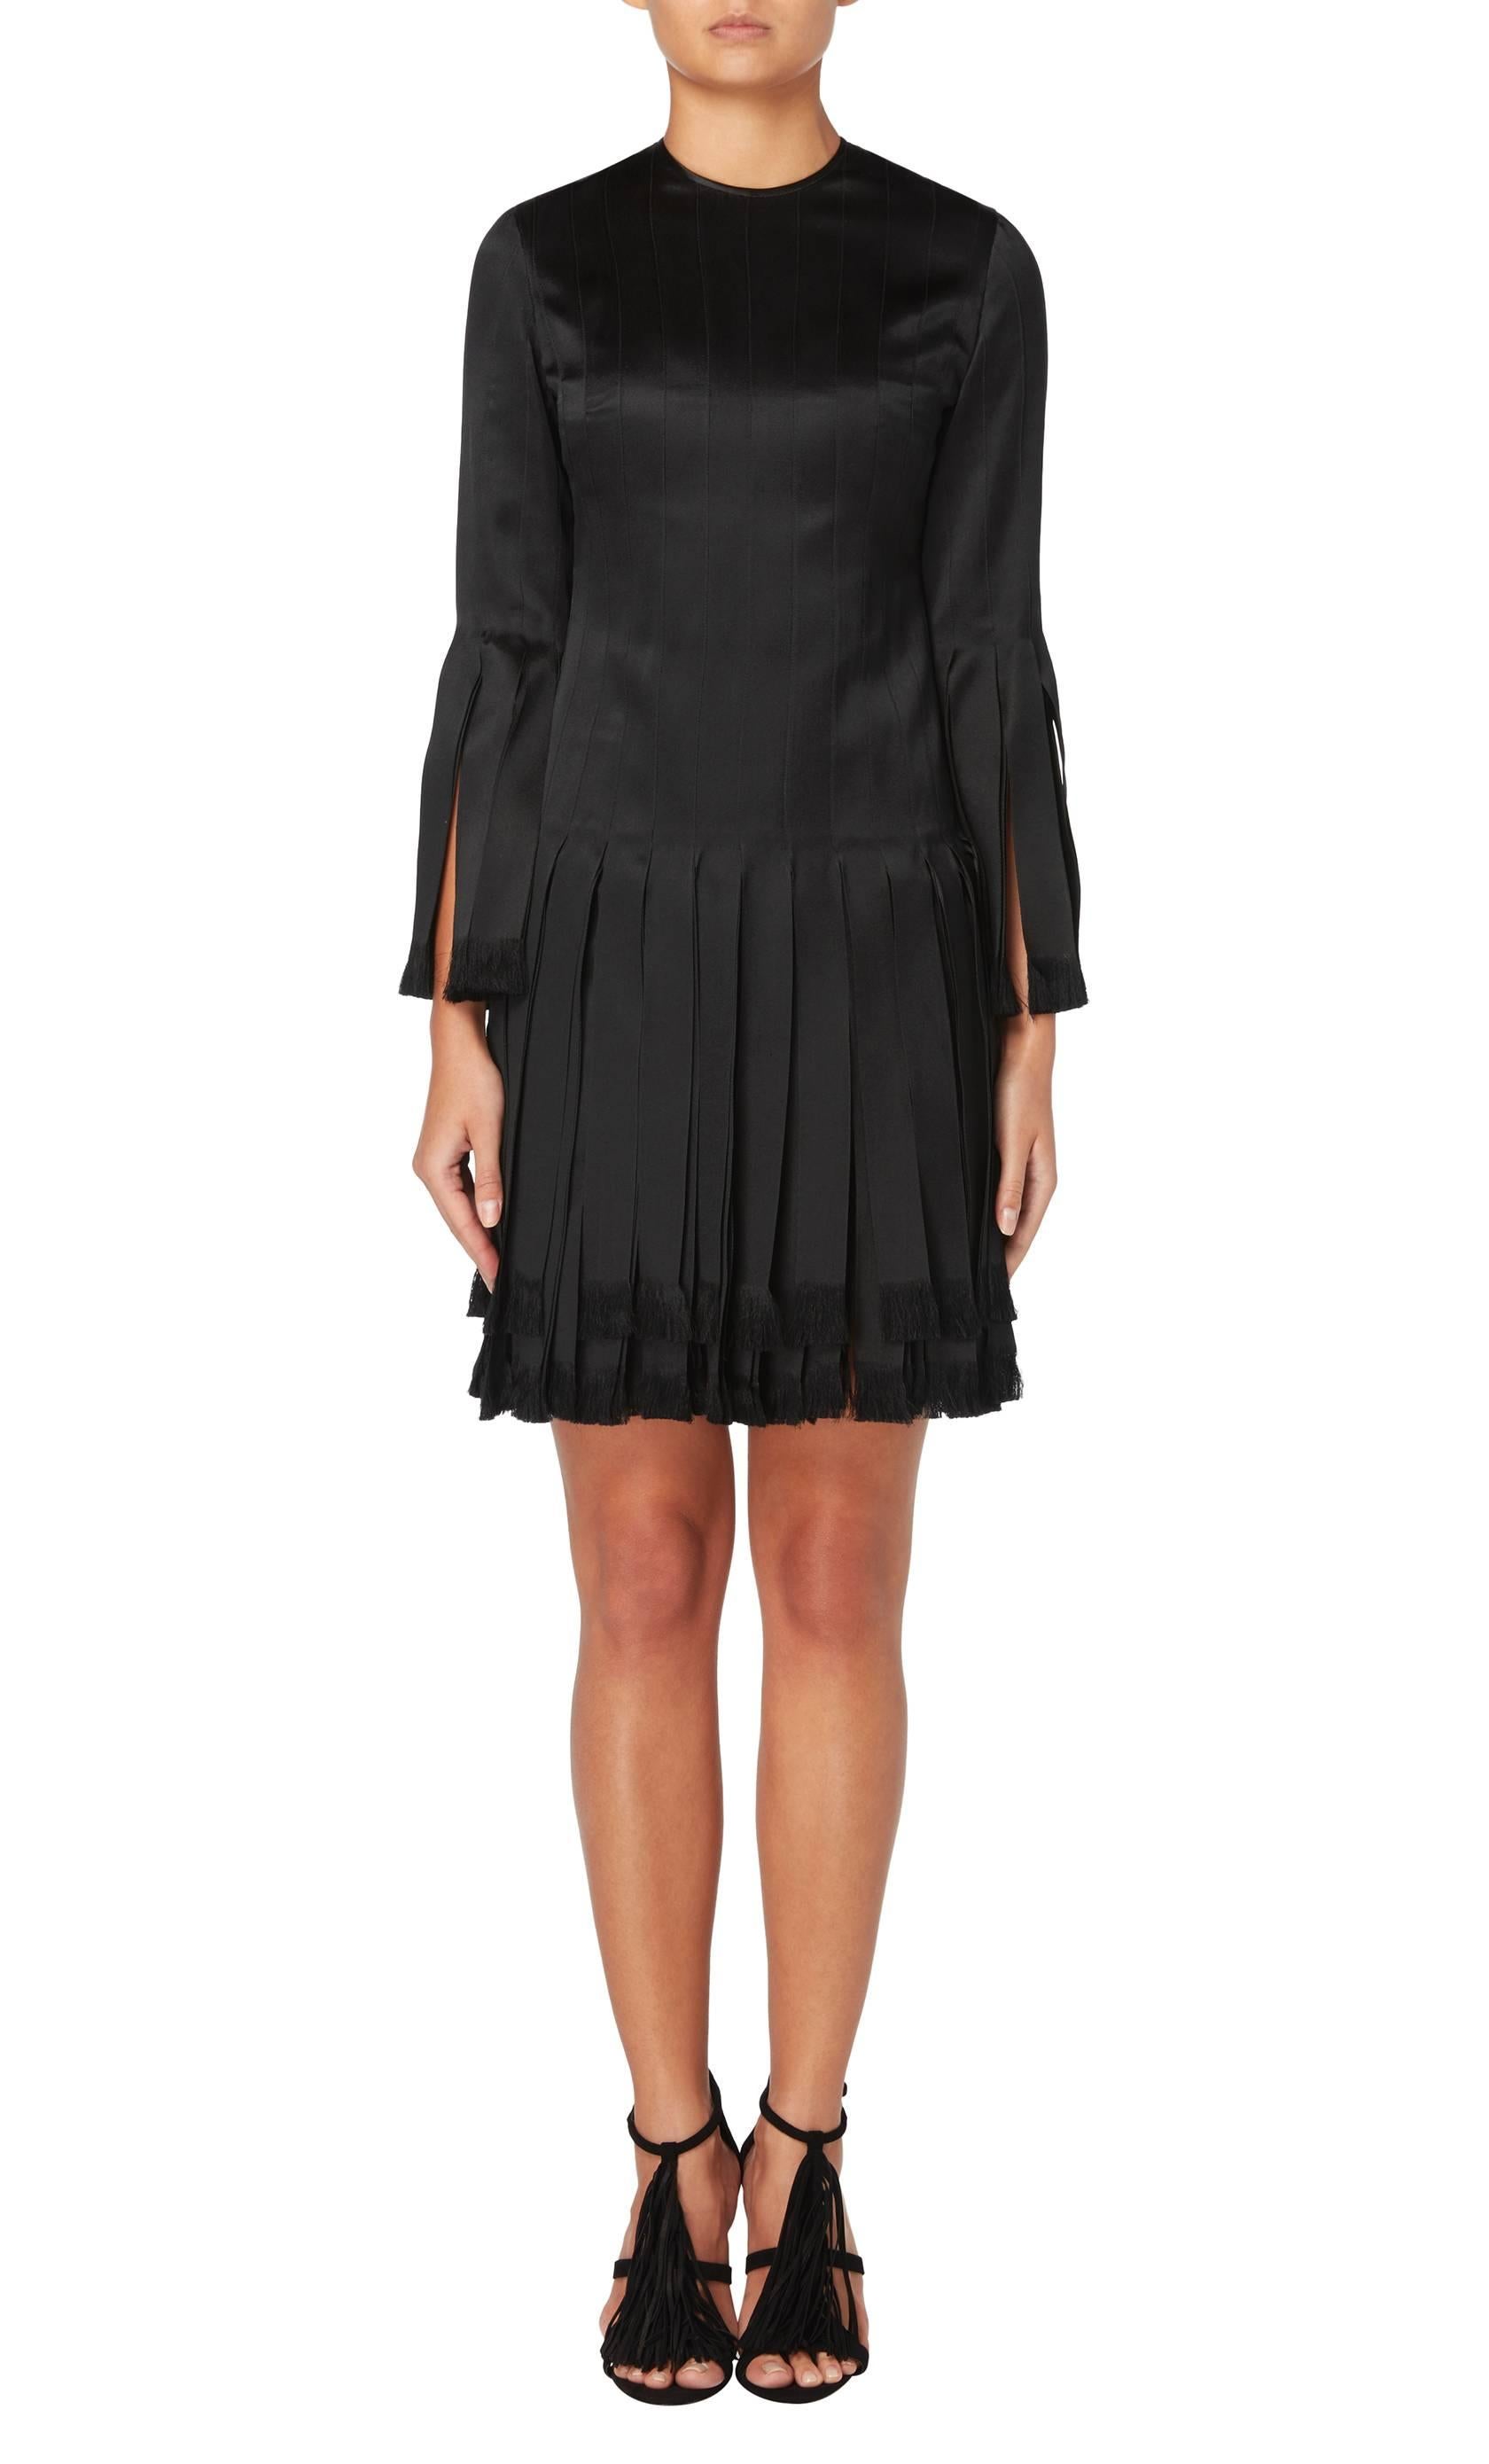 A fun twist on the classic LBD, this Galanos ‘Carwash’ mini dress is constructed in black silk and features a round neckline and three-quarter sleeves with carwash pleats to the cuffs and skirt.

Constructed in black silk
Featuring carwash